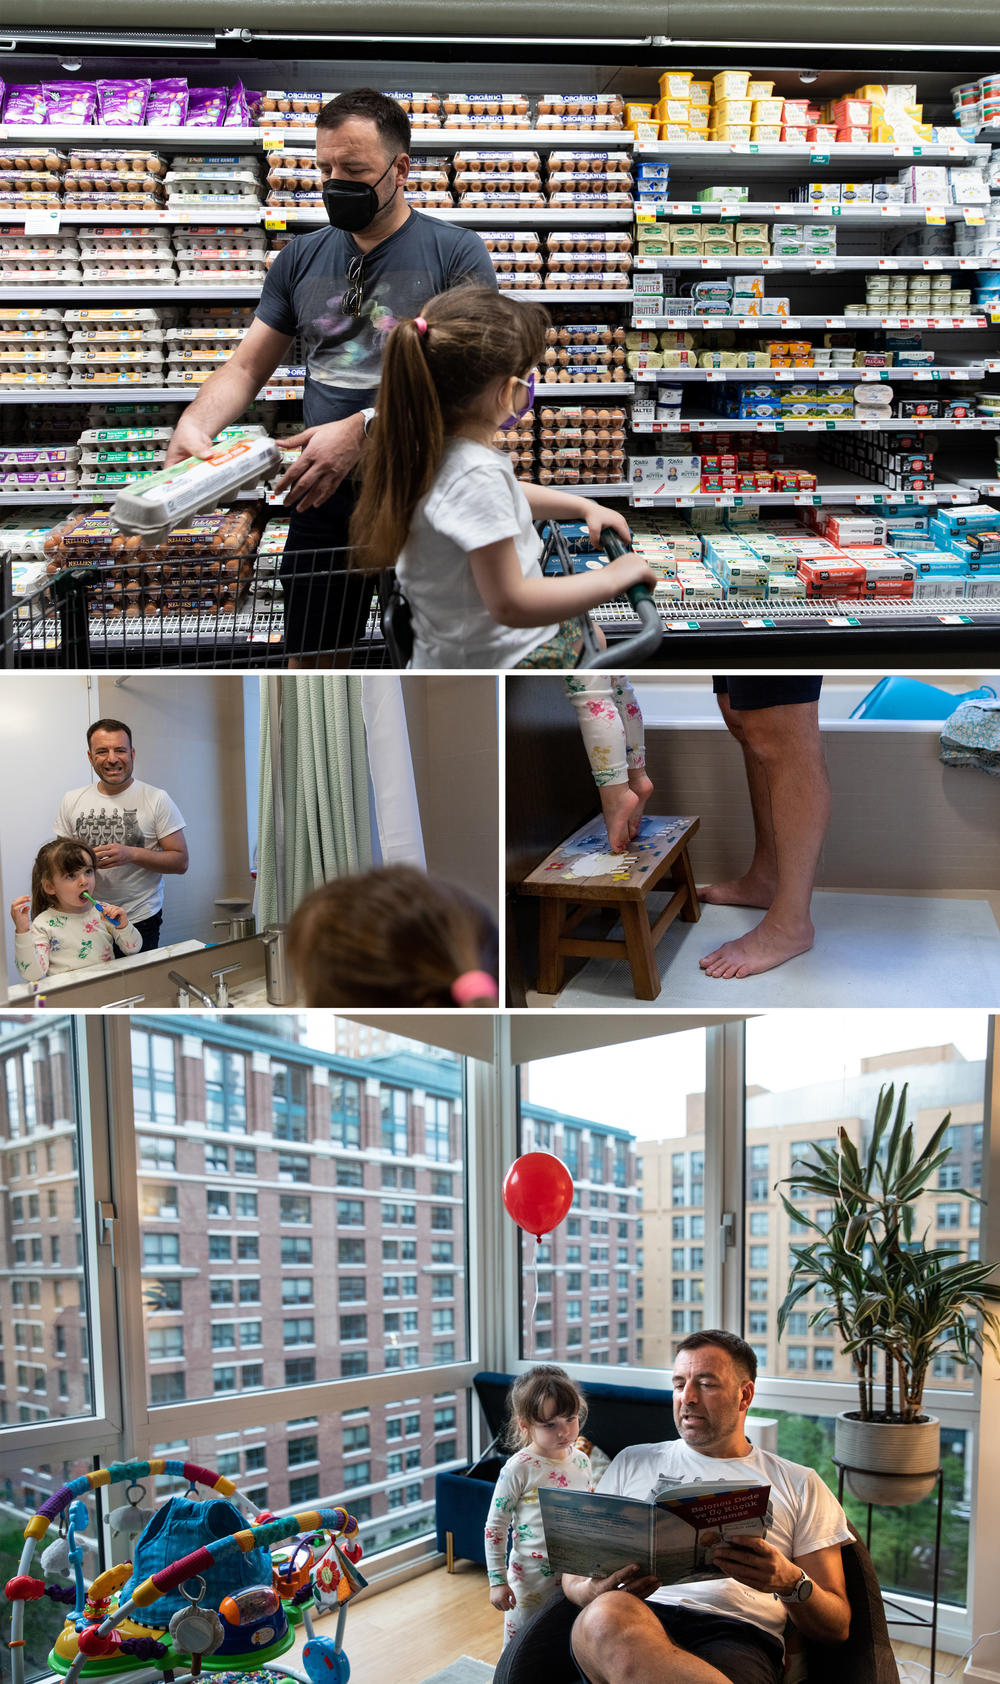 Cenk takes Emi grocery shopping and then gets her ready for bed. Cenk had both his daughters via the same surrogate using donor eggs and his sperm to make the embryos that were implanted.